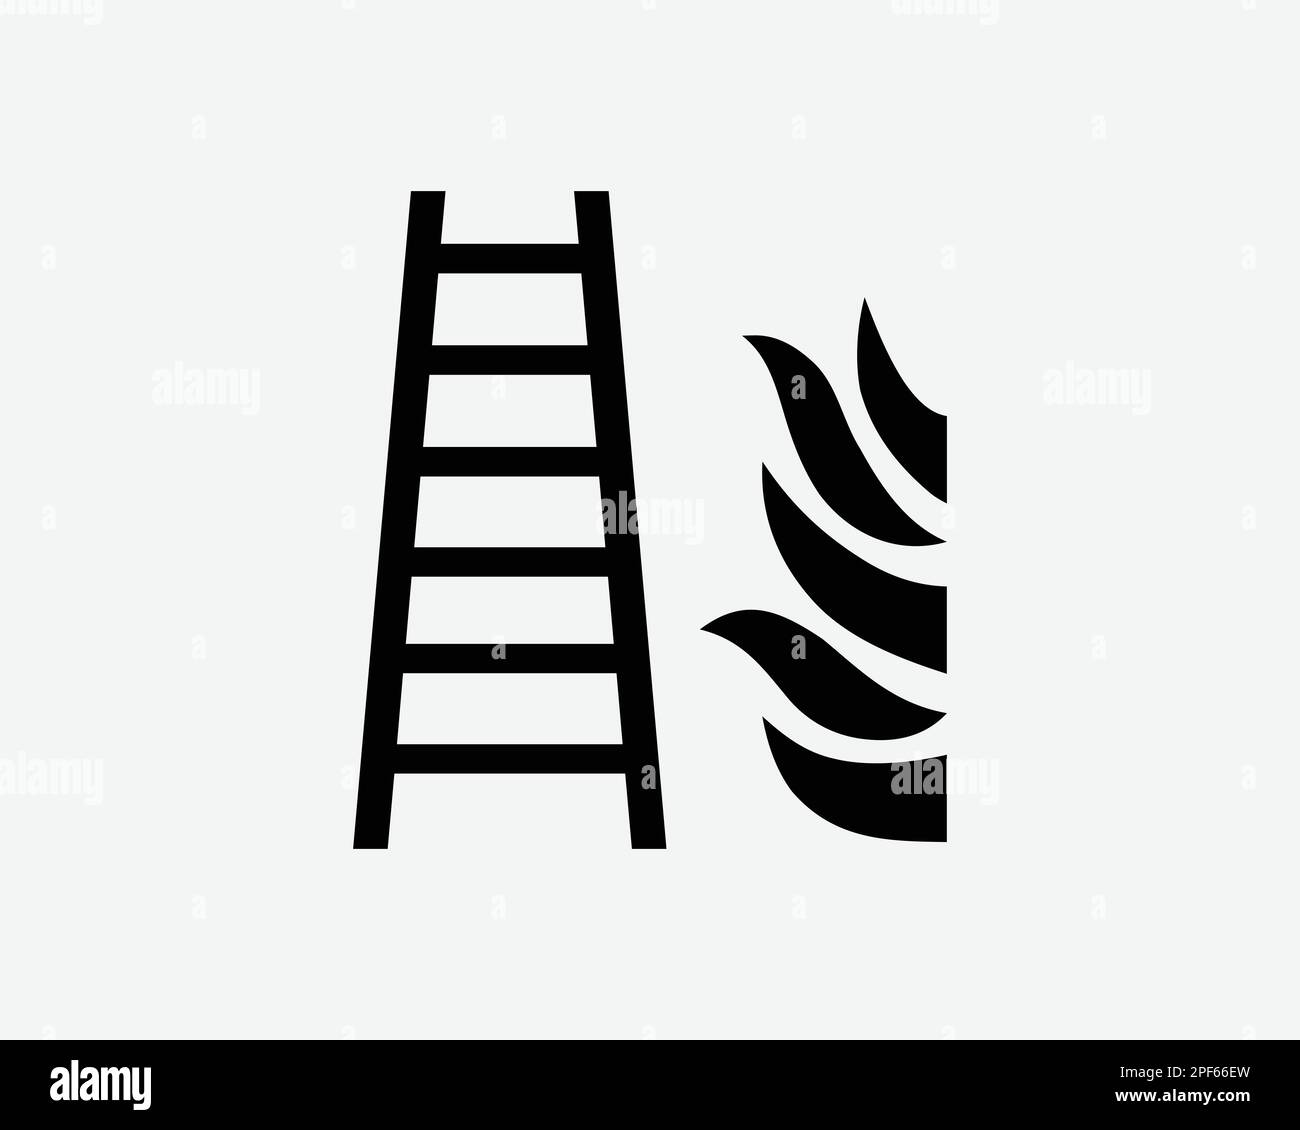 Fire Ladder Steps Firefighting Equipment Tool Device Black White Silhouette Sign Symbol Icon Clipart Graphic Artwork Pictogram Illustration Vector Stock Vector